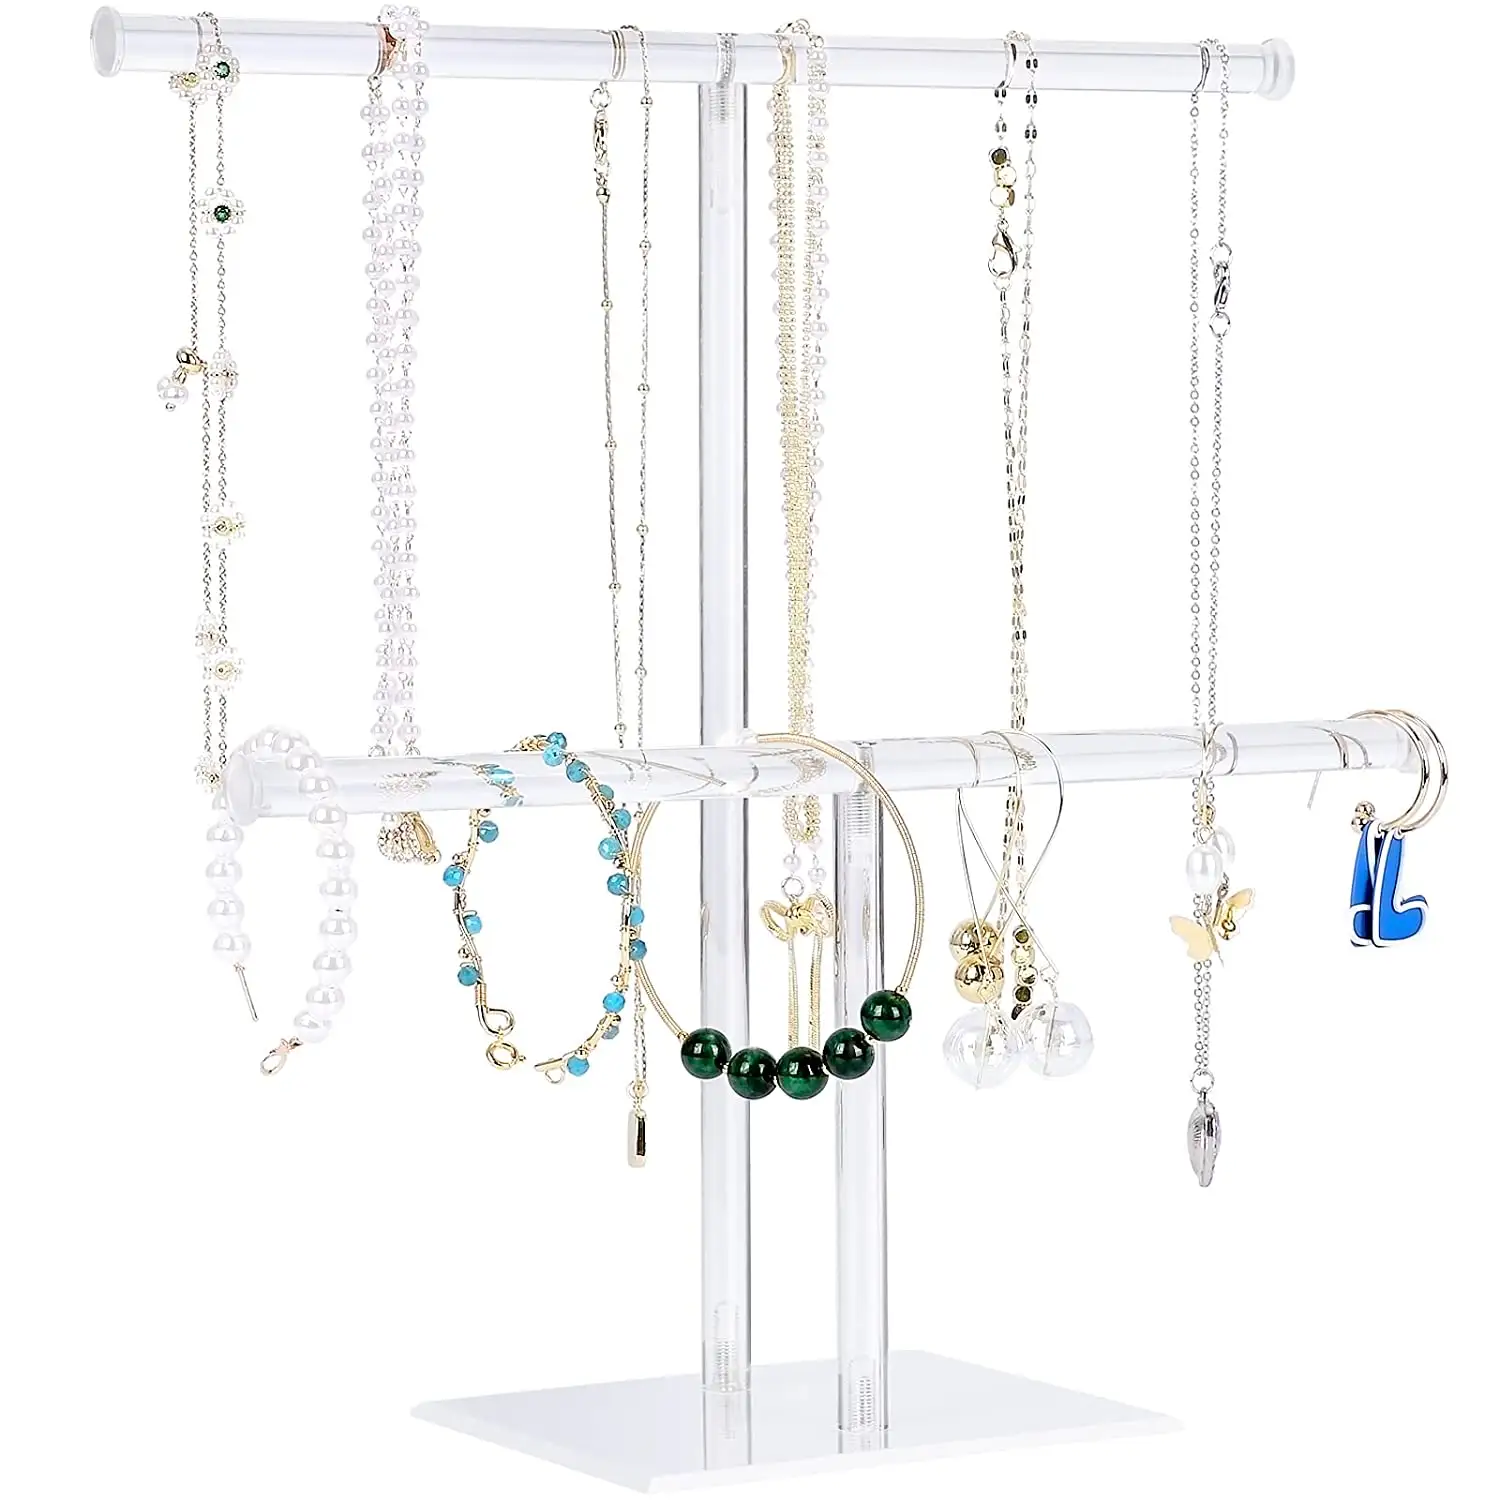 Clear 2-Tier T Stand for Bangles Necklaces Bracelets Rings Earrings and Watch Jewelry Stand Acrylic Jewelry Display Holder